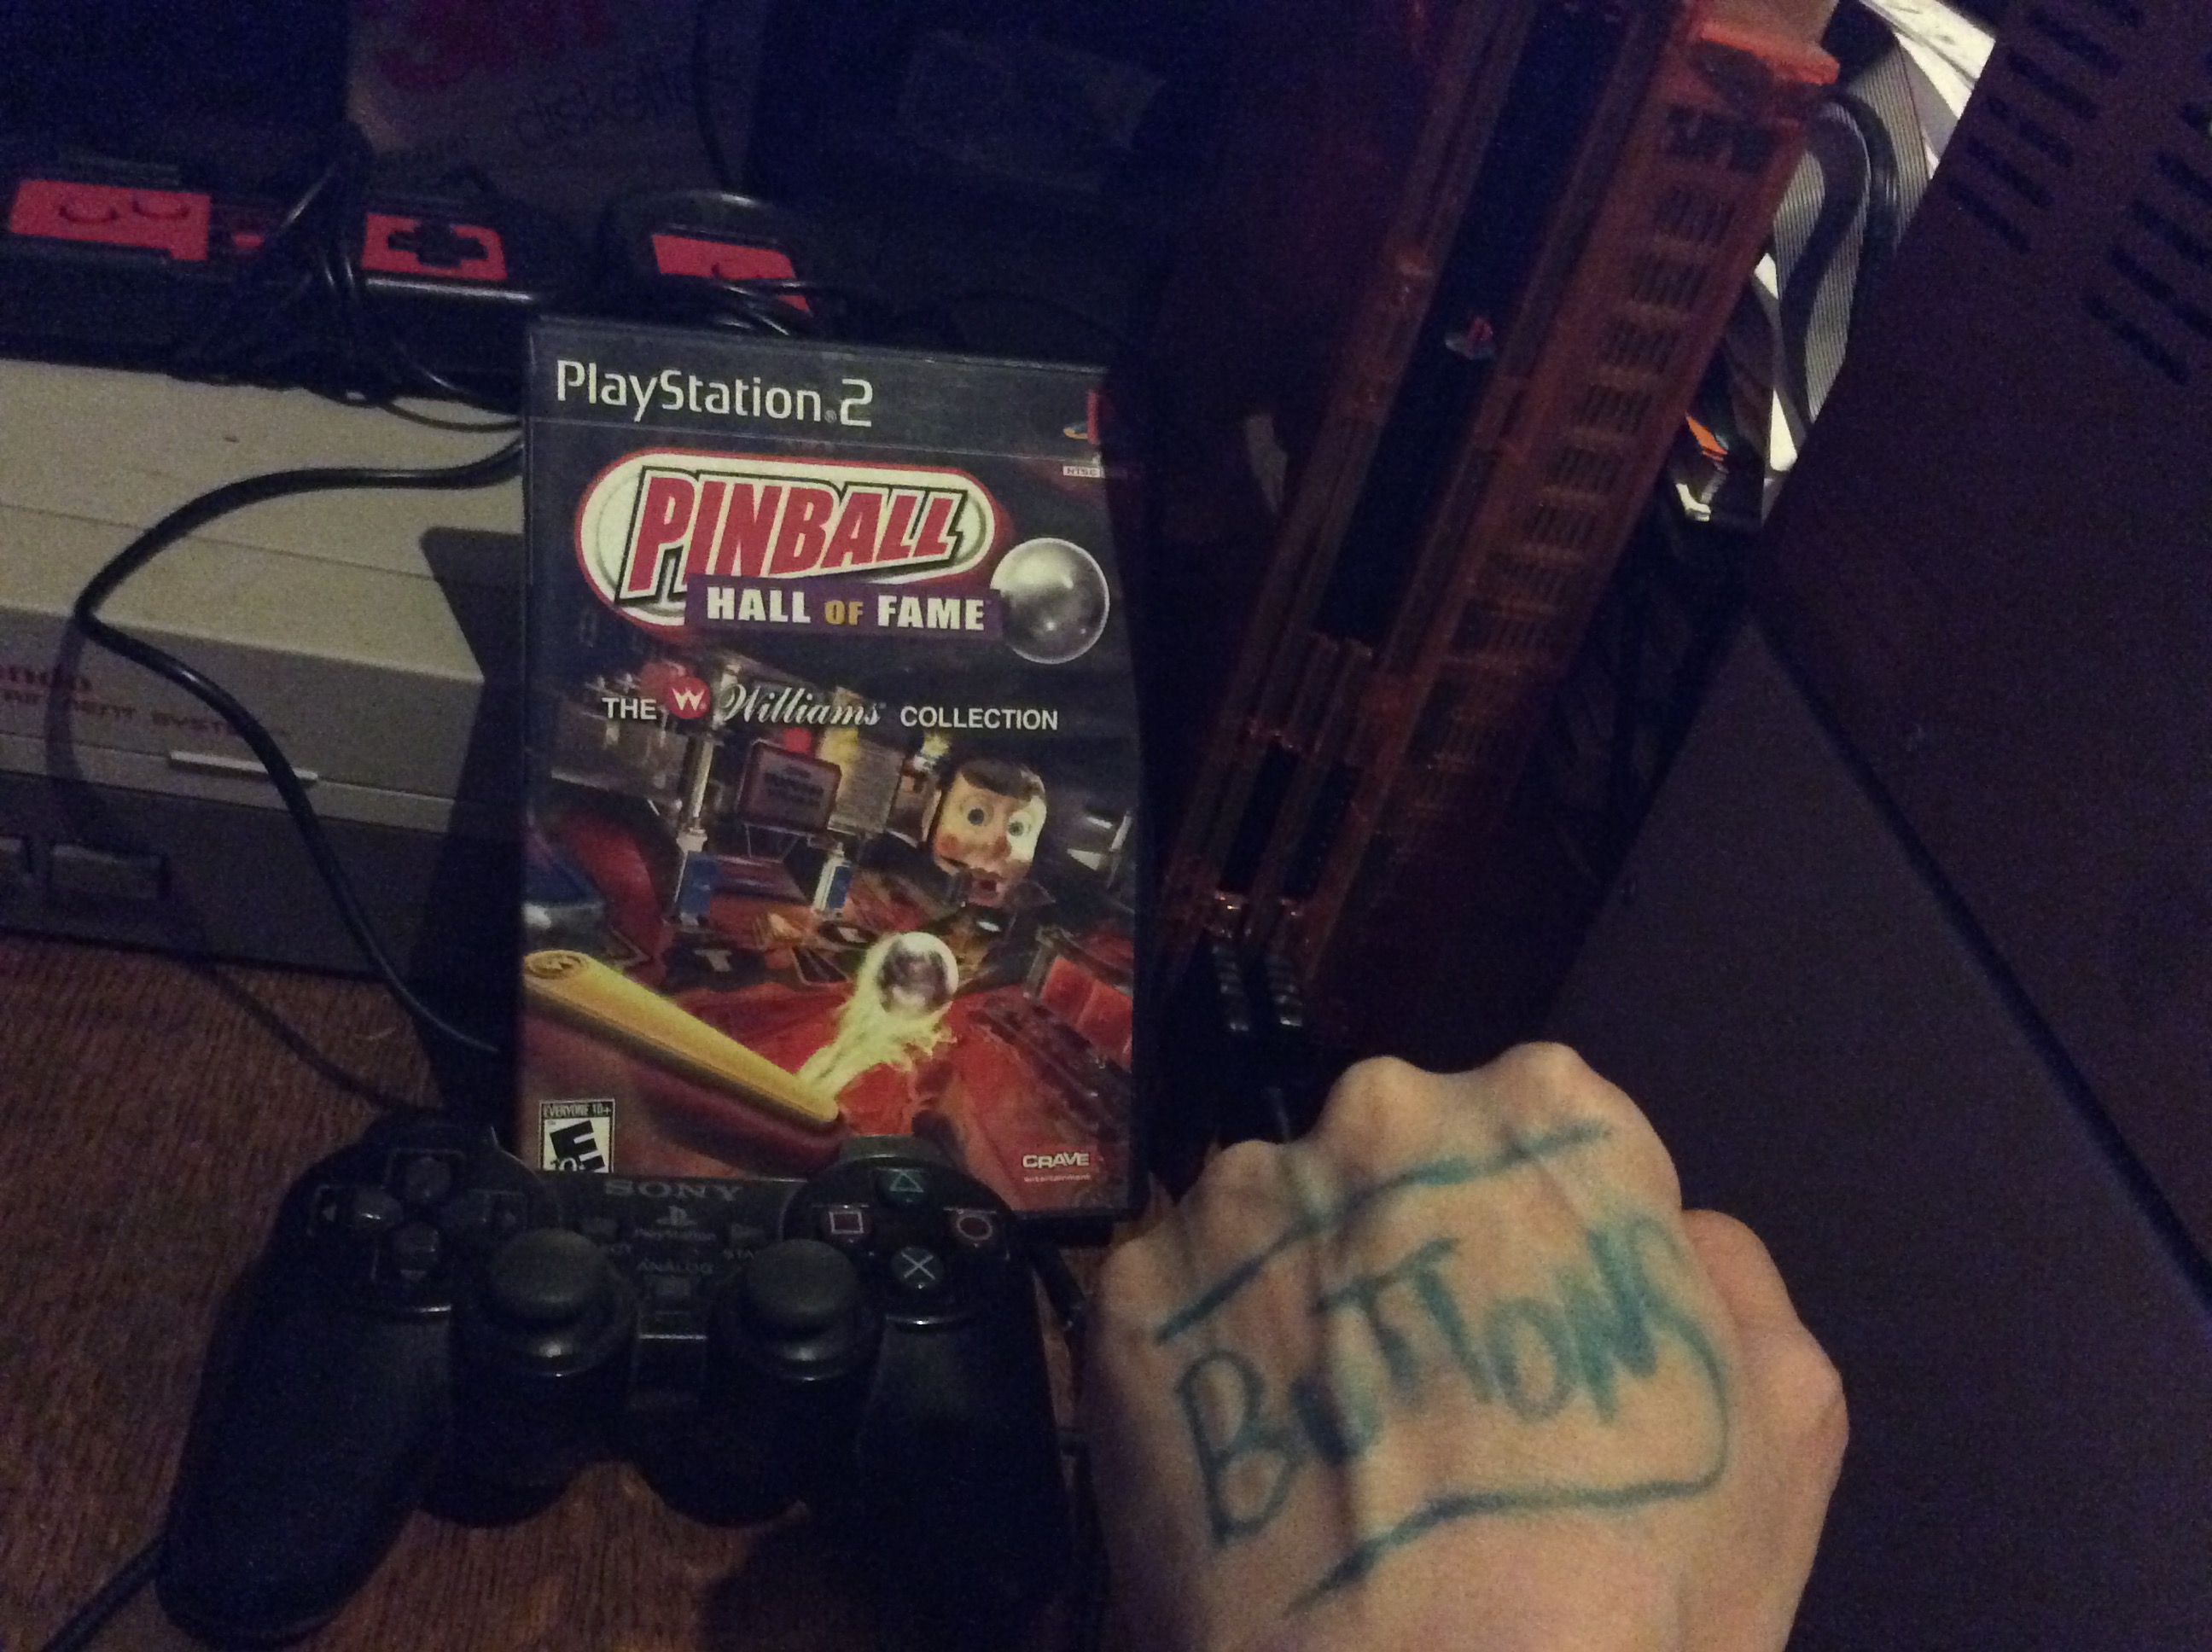 Buttons: Pinball Hall of Fame: The Williams Collection: Firepower (Playstation 2) 427,310 points on 2020-01-21 05:28:22